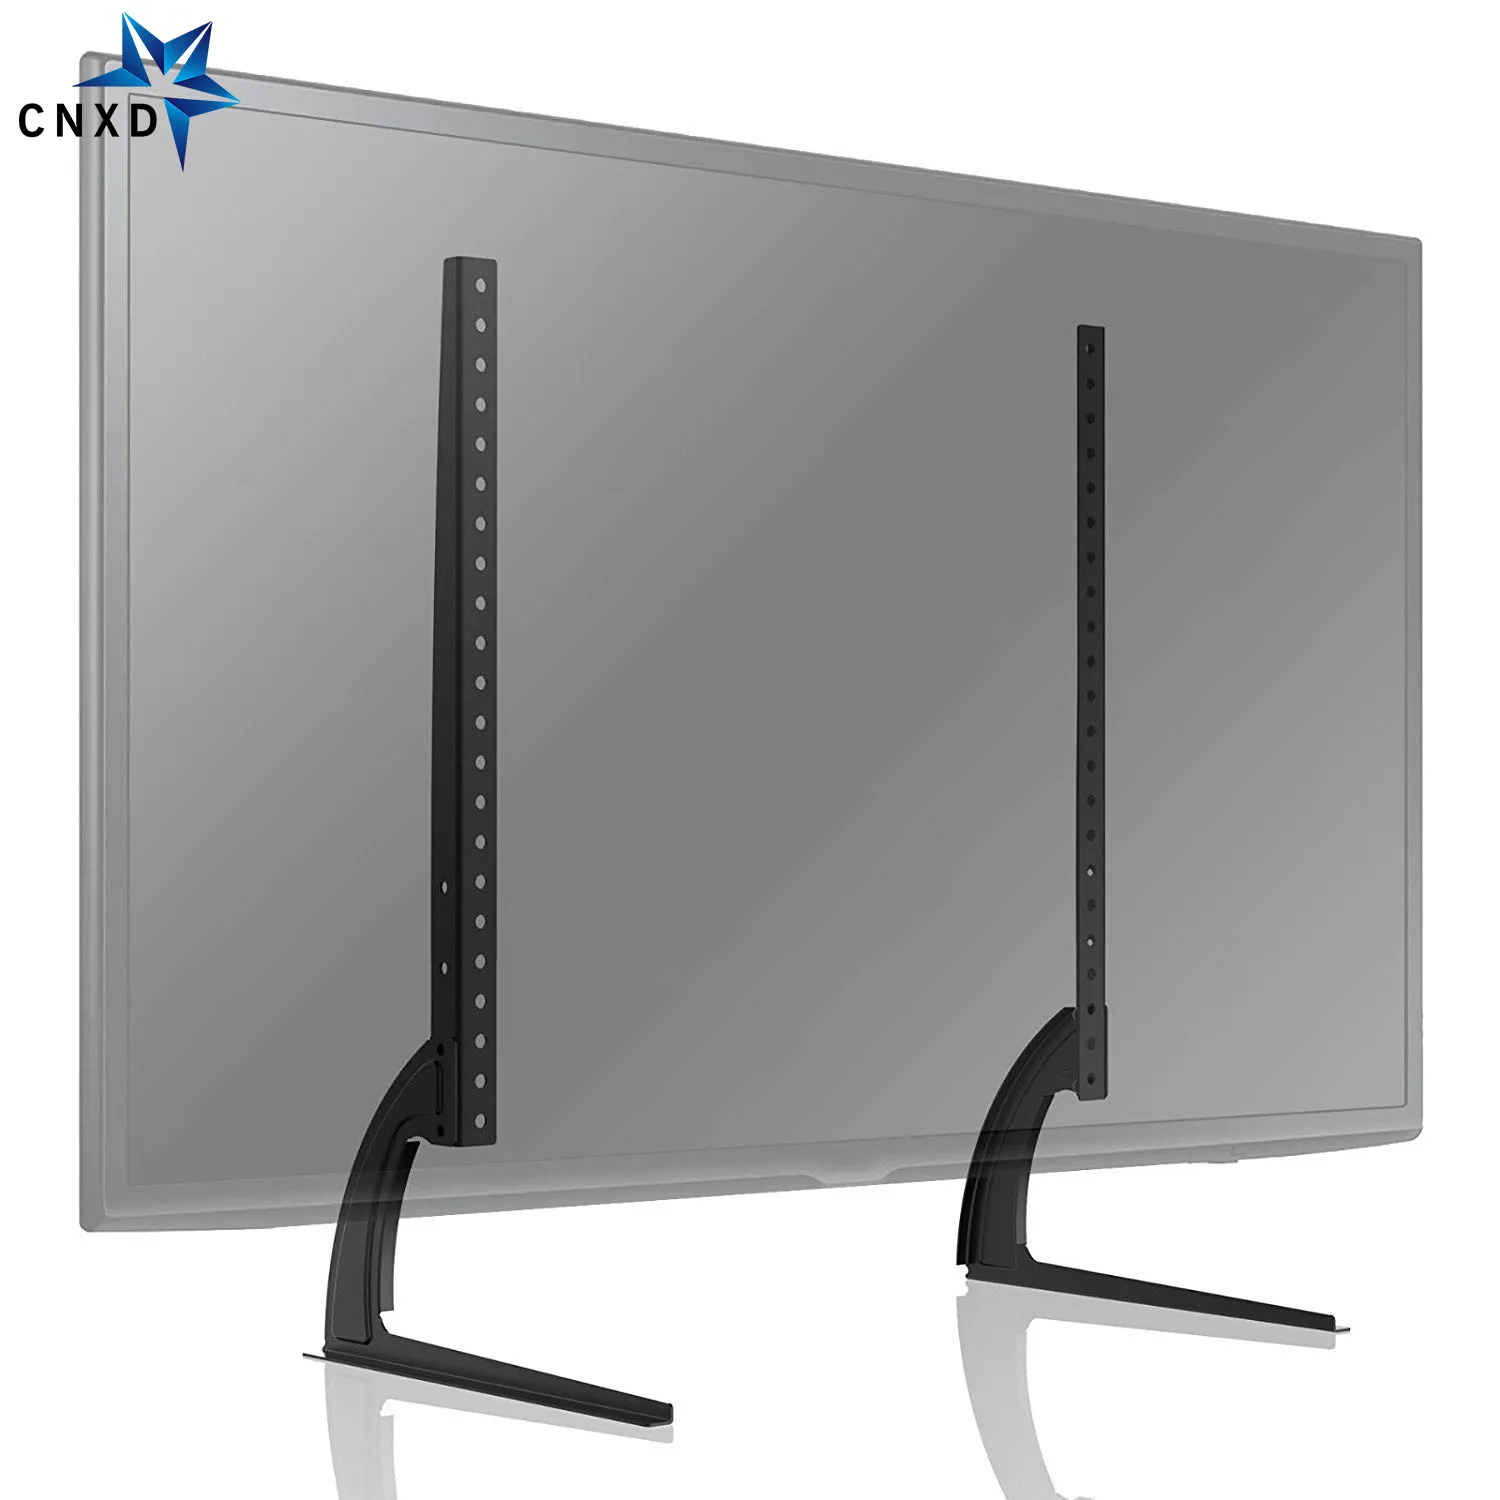 Universal TV Table Top TV Stand fits Most 22" 55" LCD LED Flat Screen TVs 